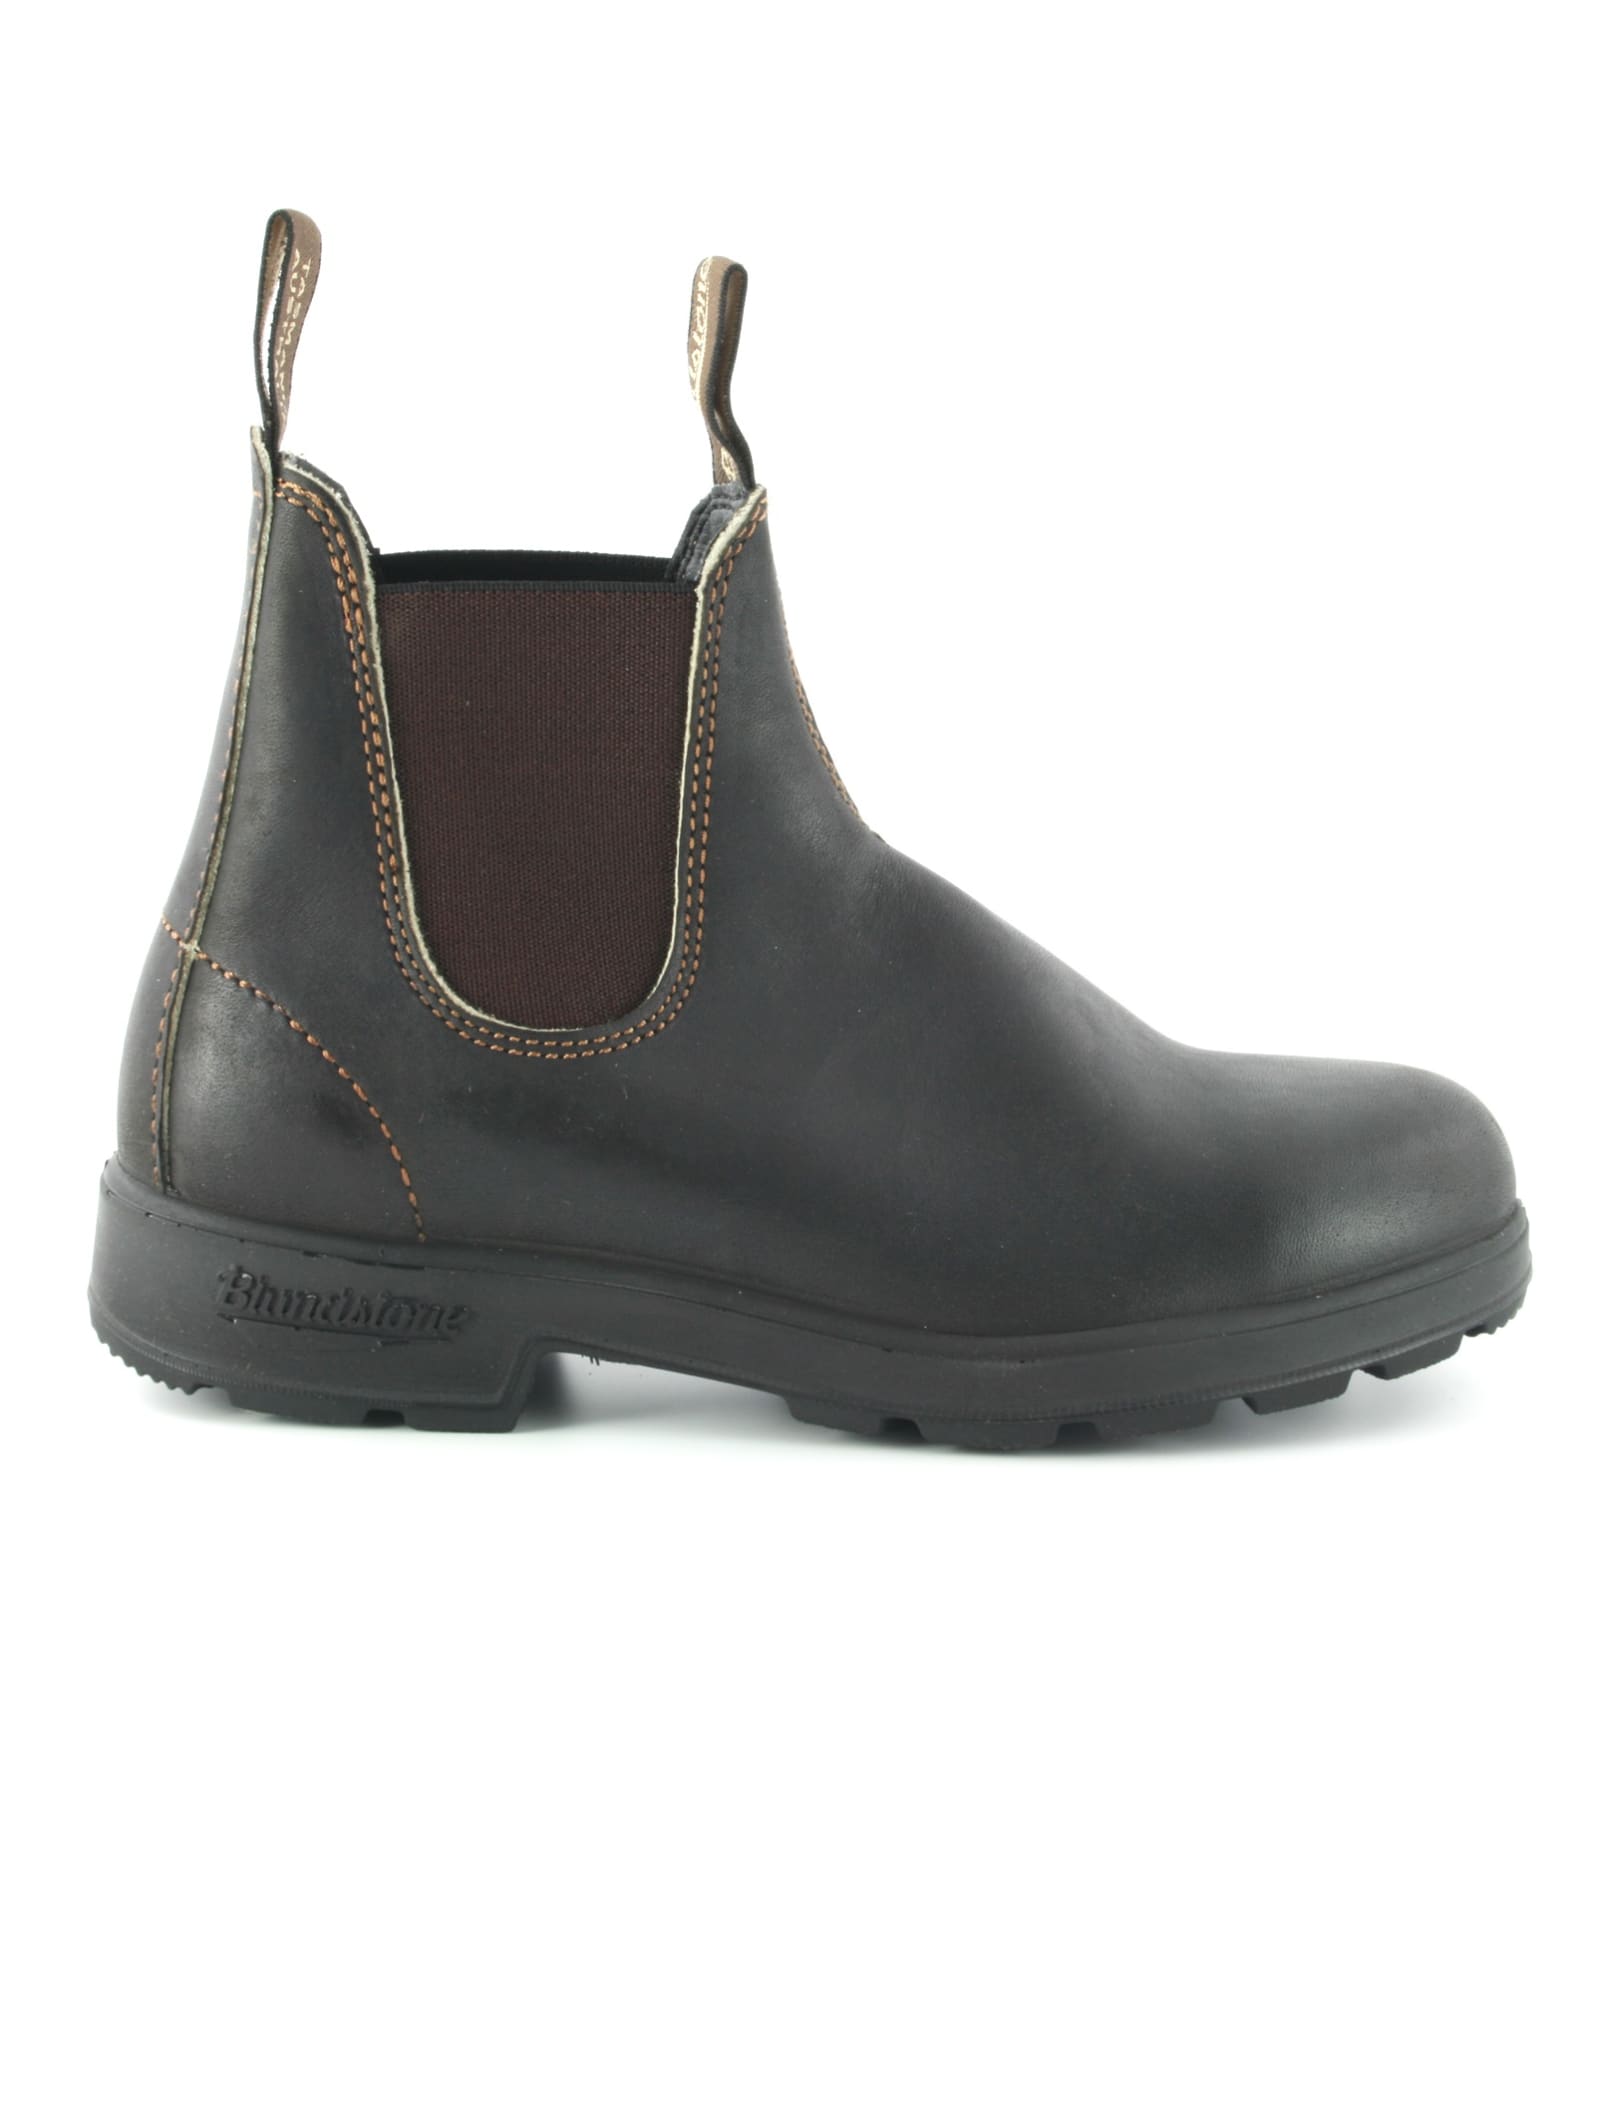 Blundstone Stout Leather